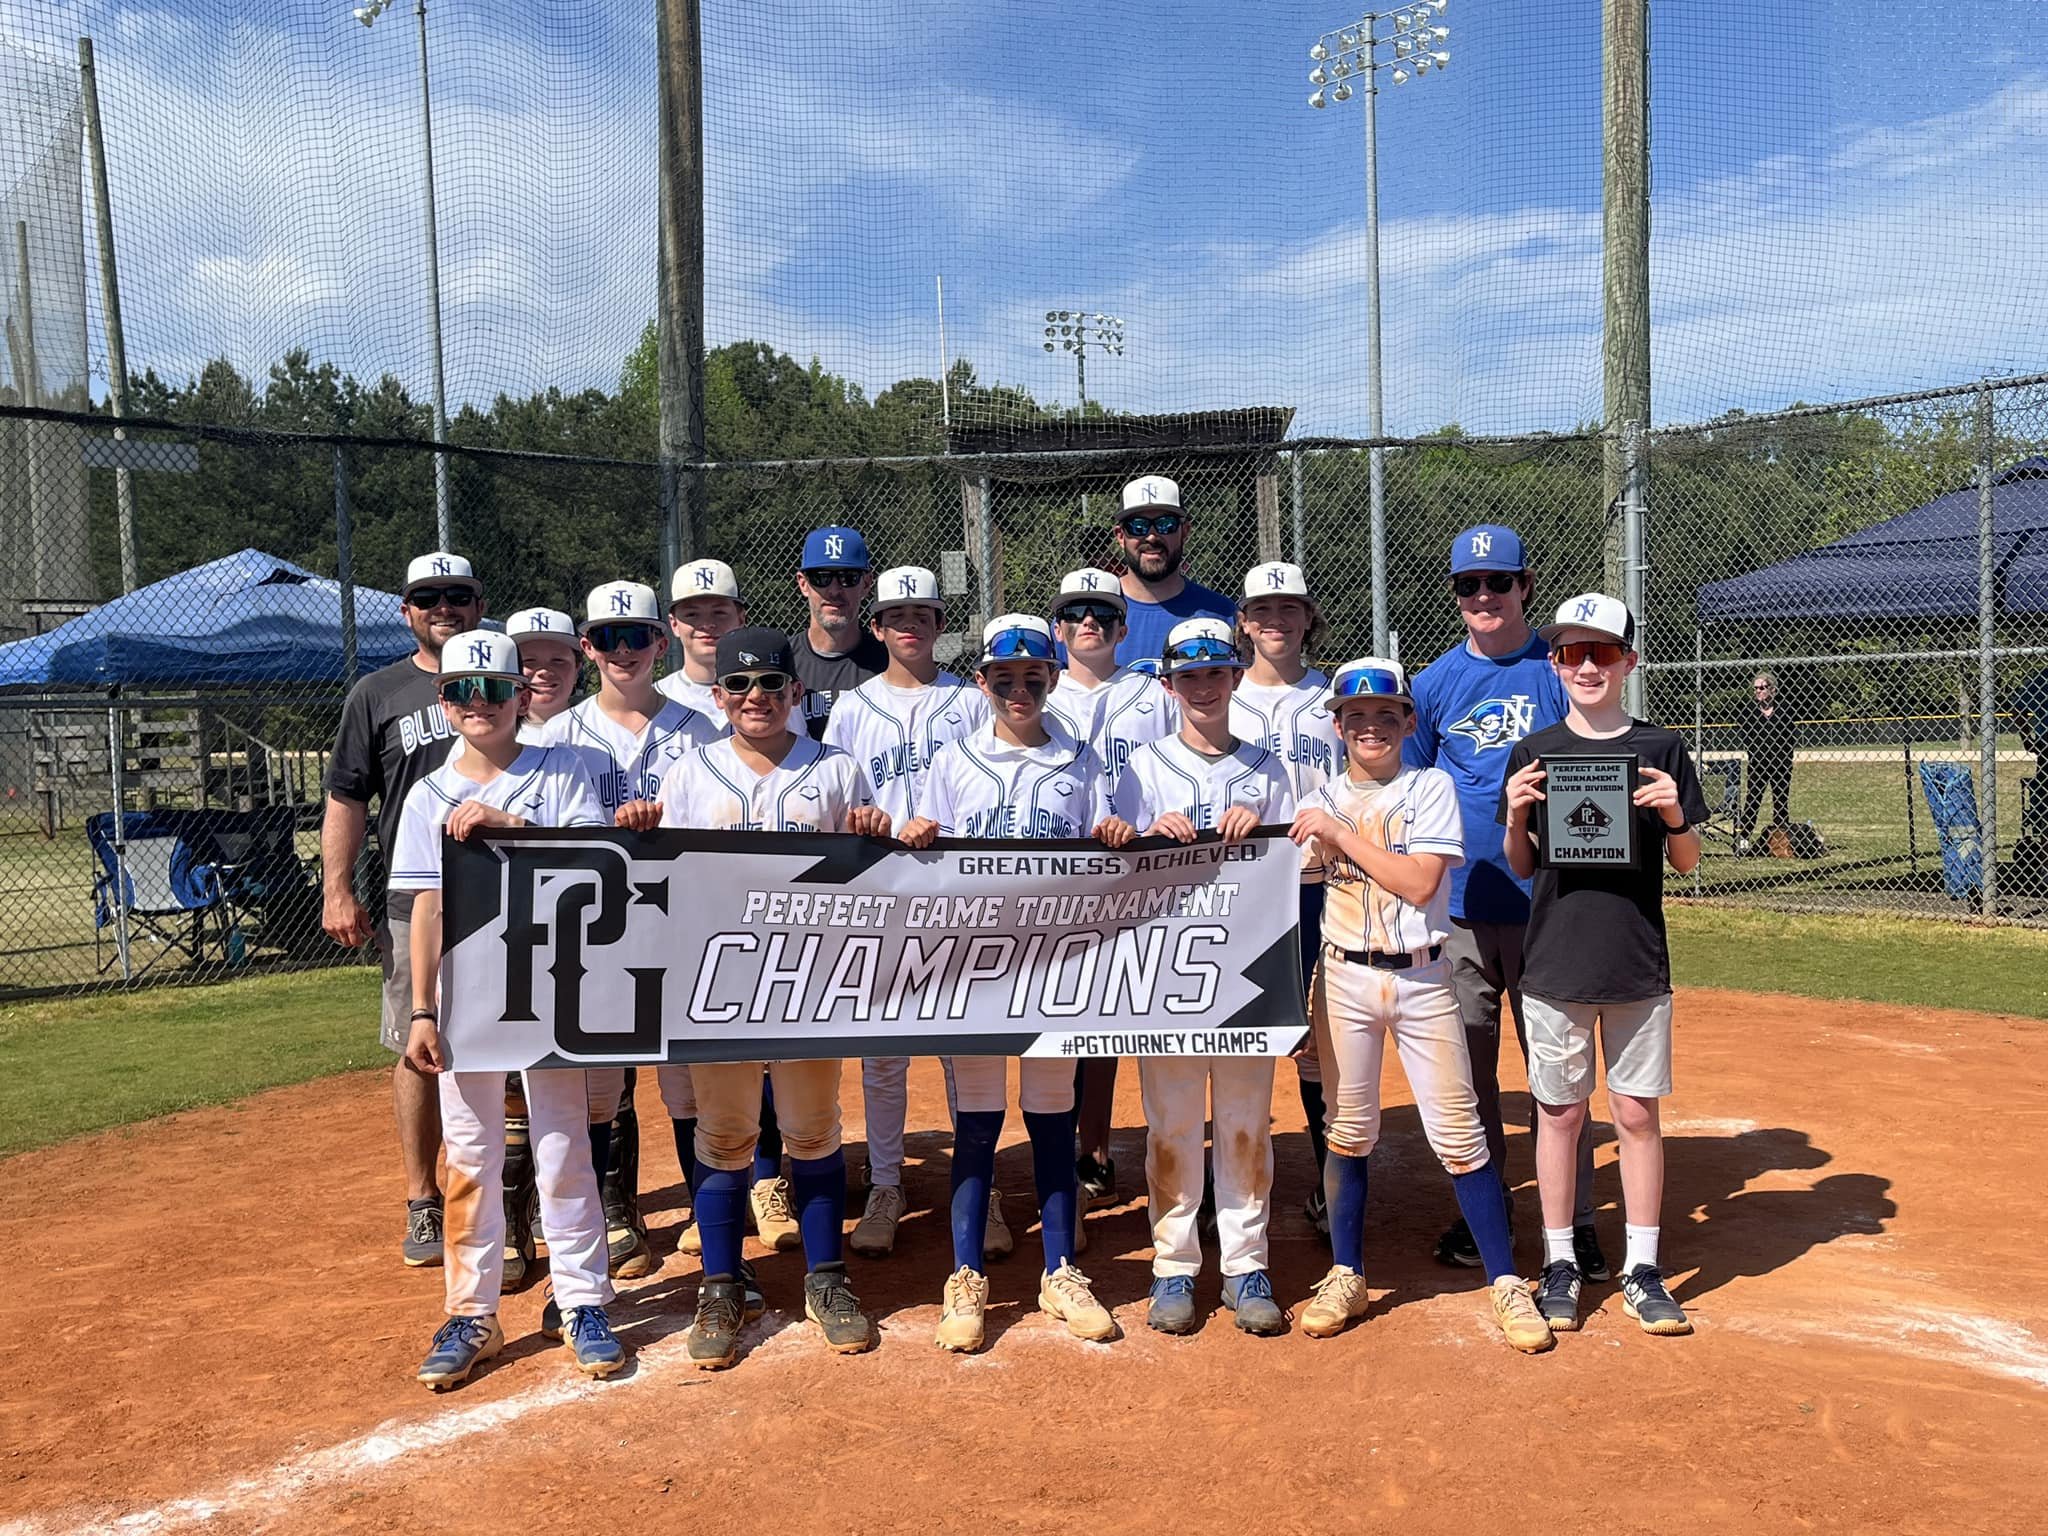 CONGRATULATIONS to the Ninth Inning Blue Jays 12u Timms on winning the Perfect Game Southeast Super Regional NIT!